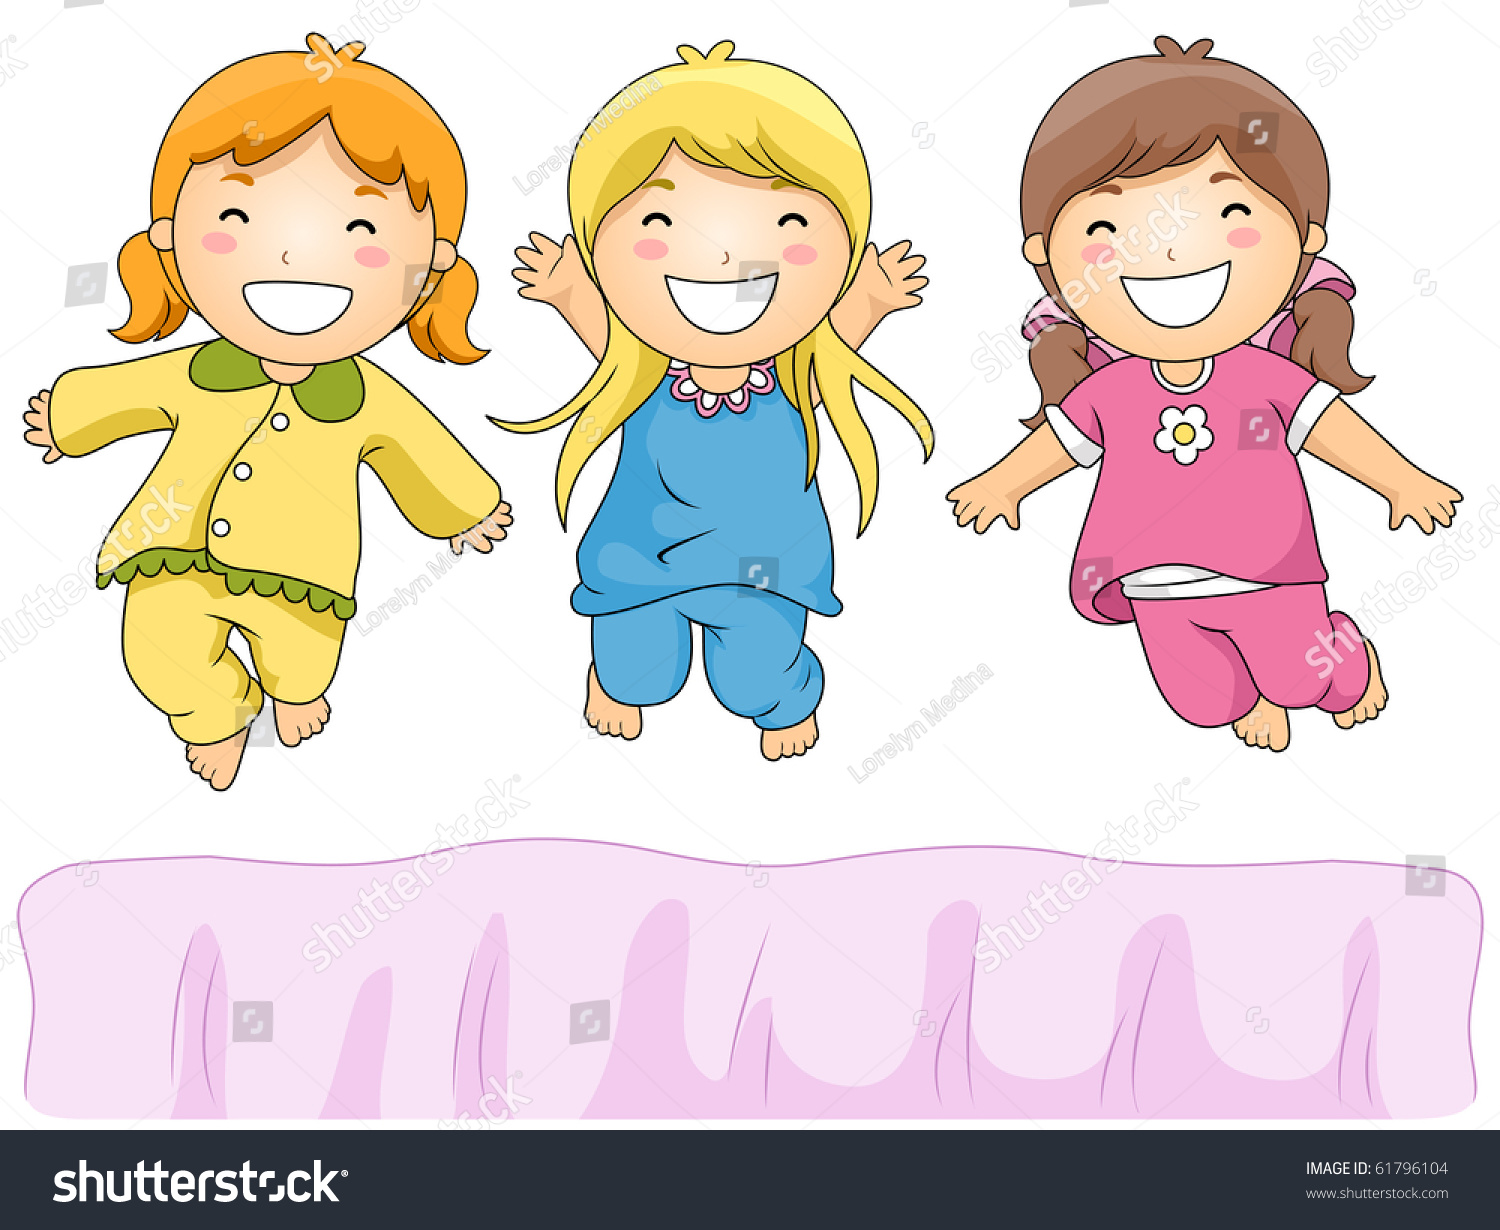 Illustration Of Cute Little Girls Having A Pajama Party - Vector ...